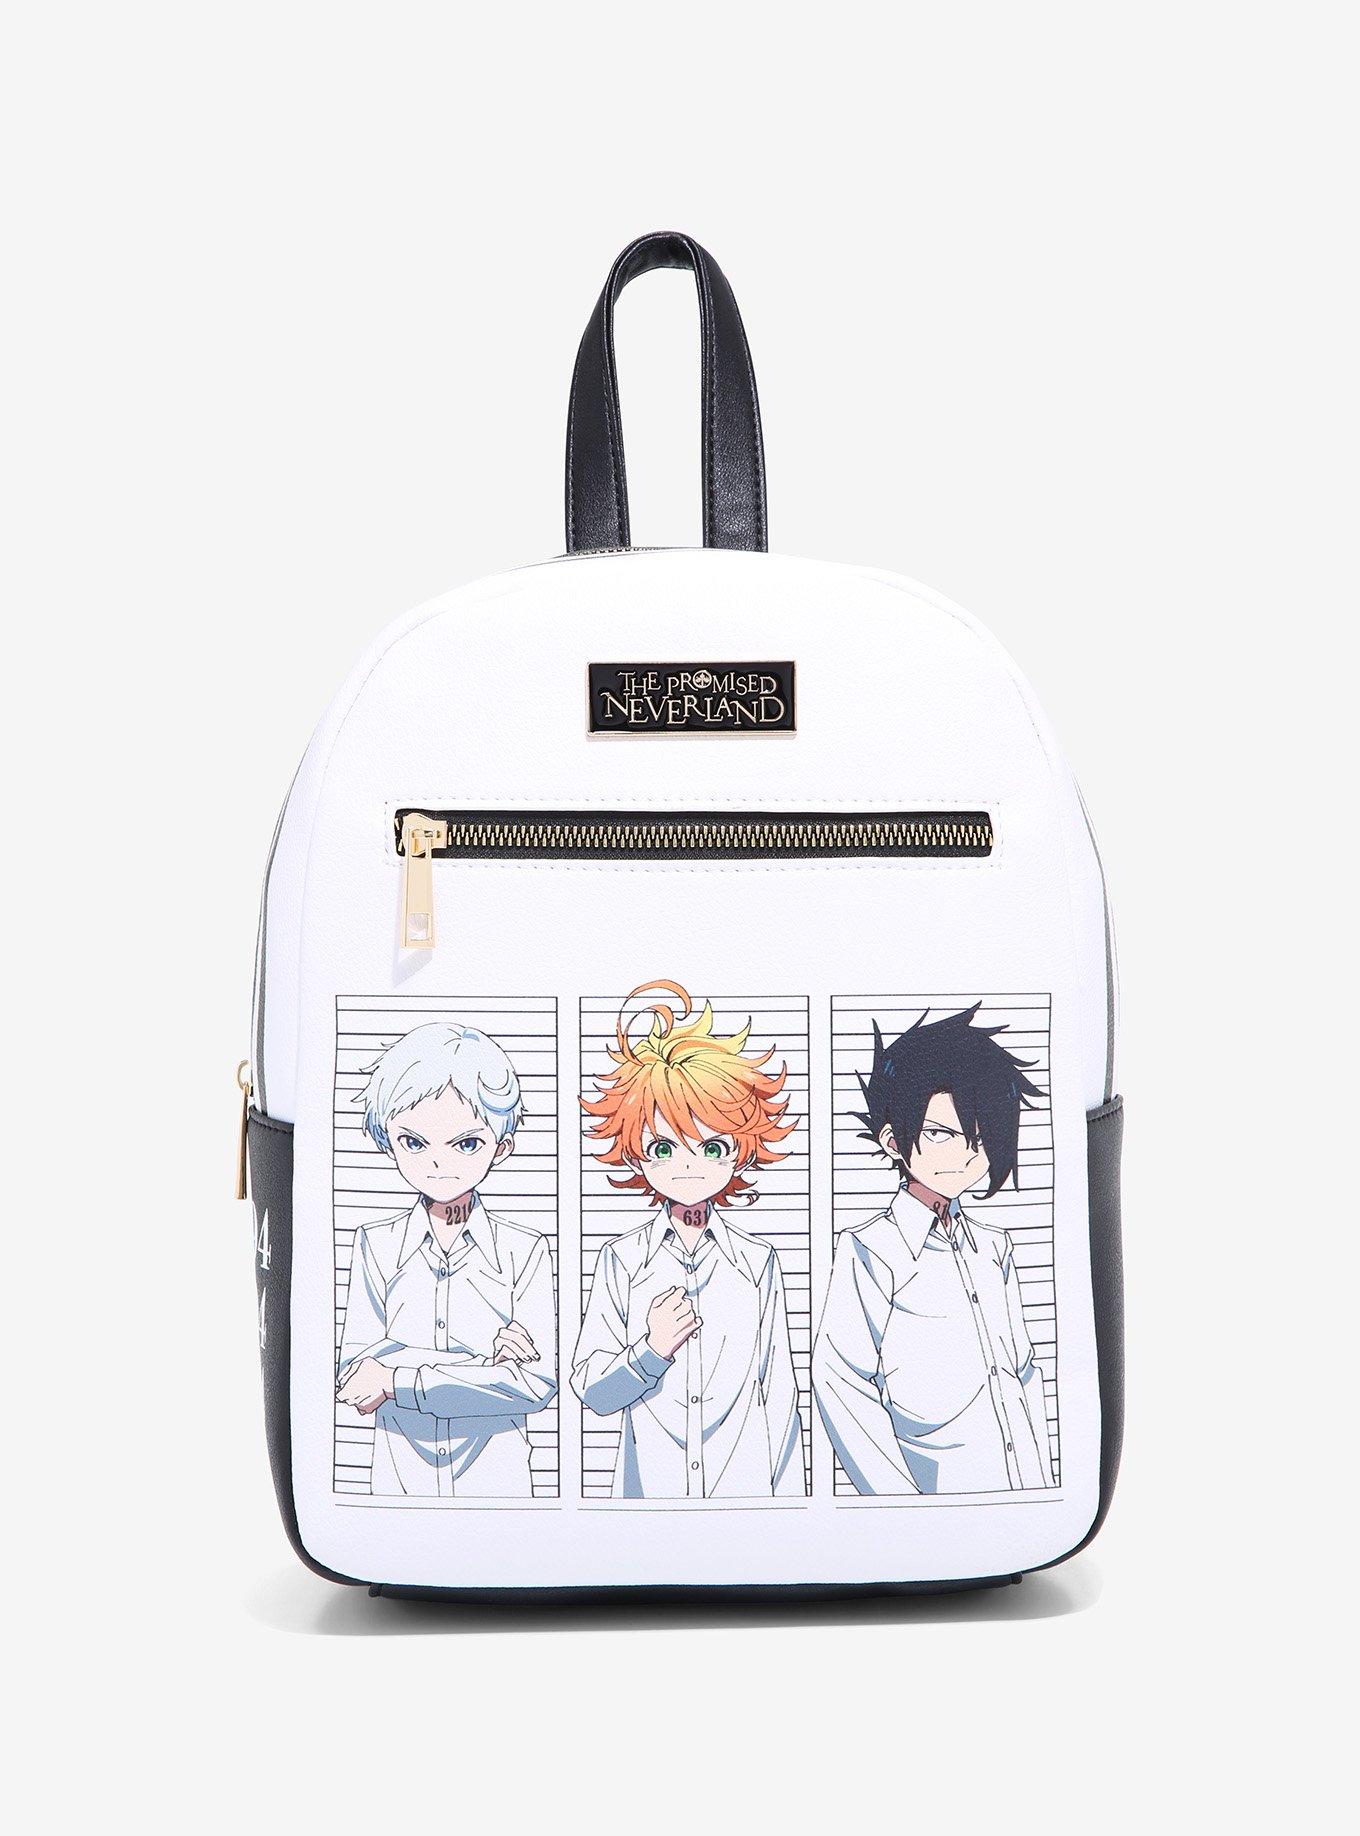 The Promised Neverland Netflix Gifts & Merchandise for Sale